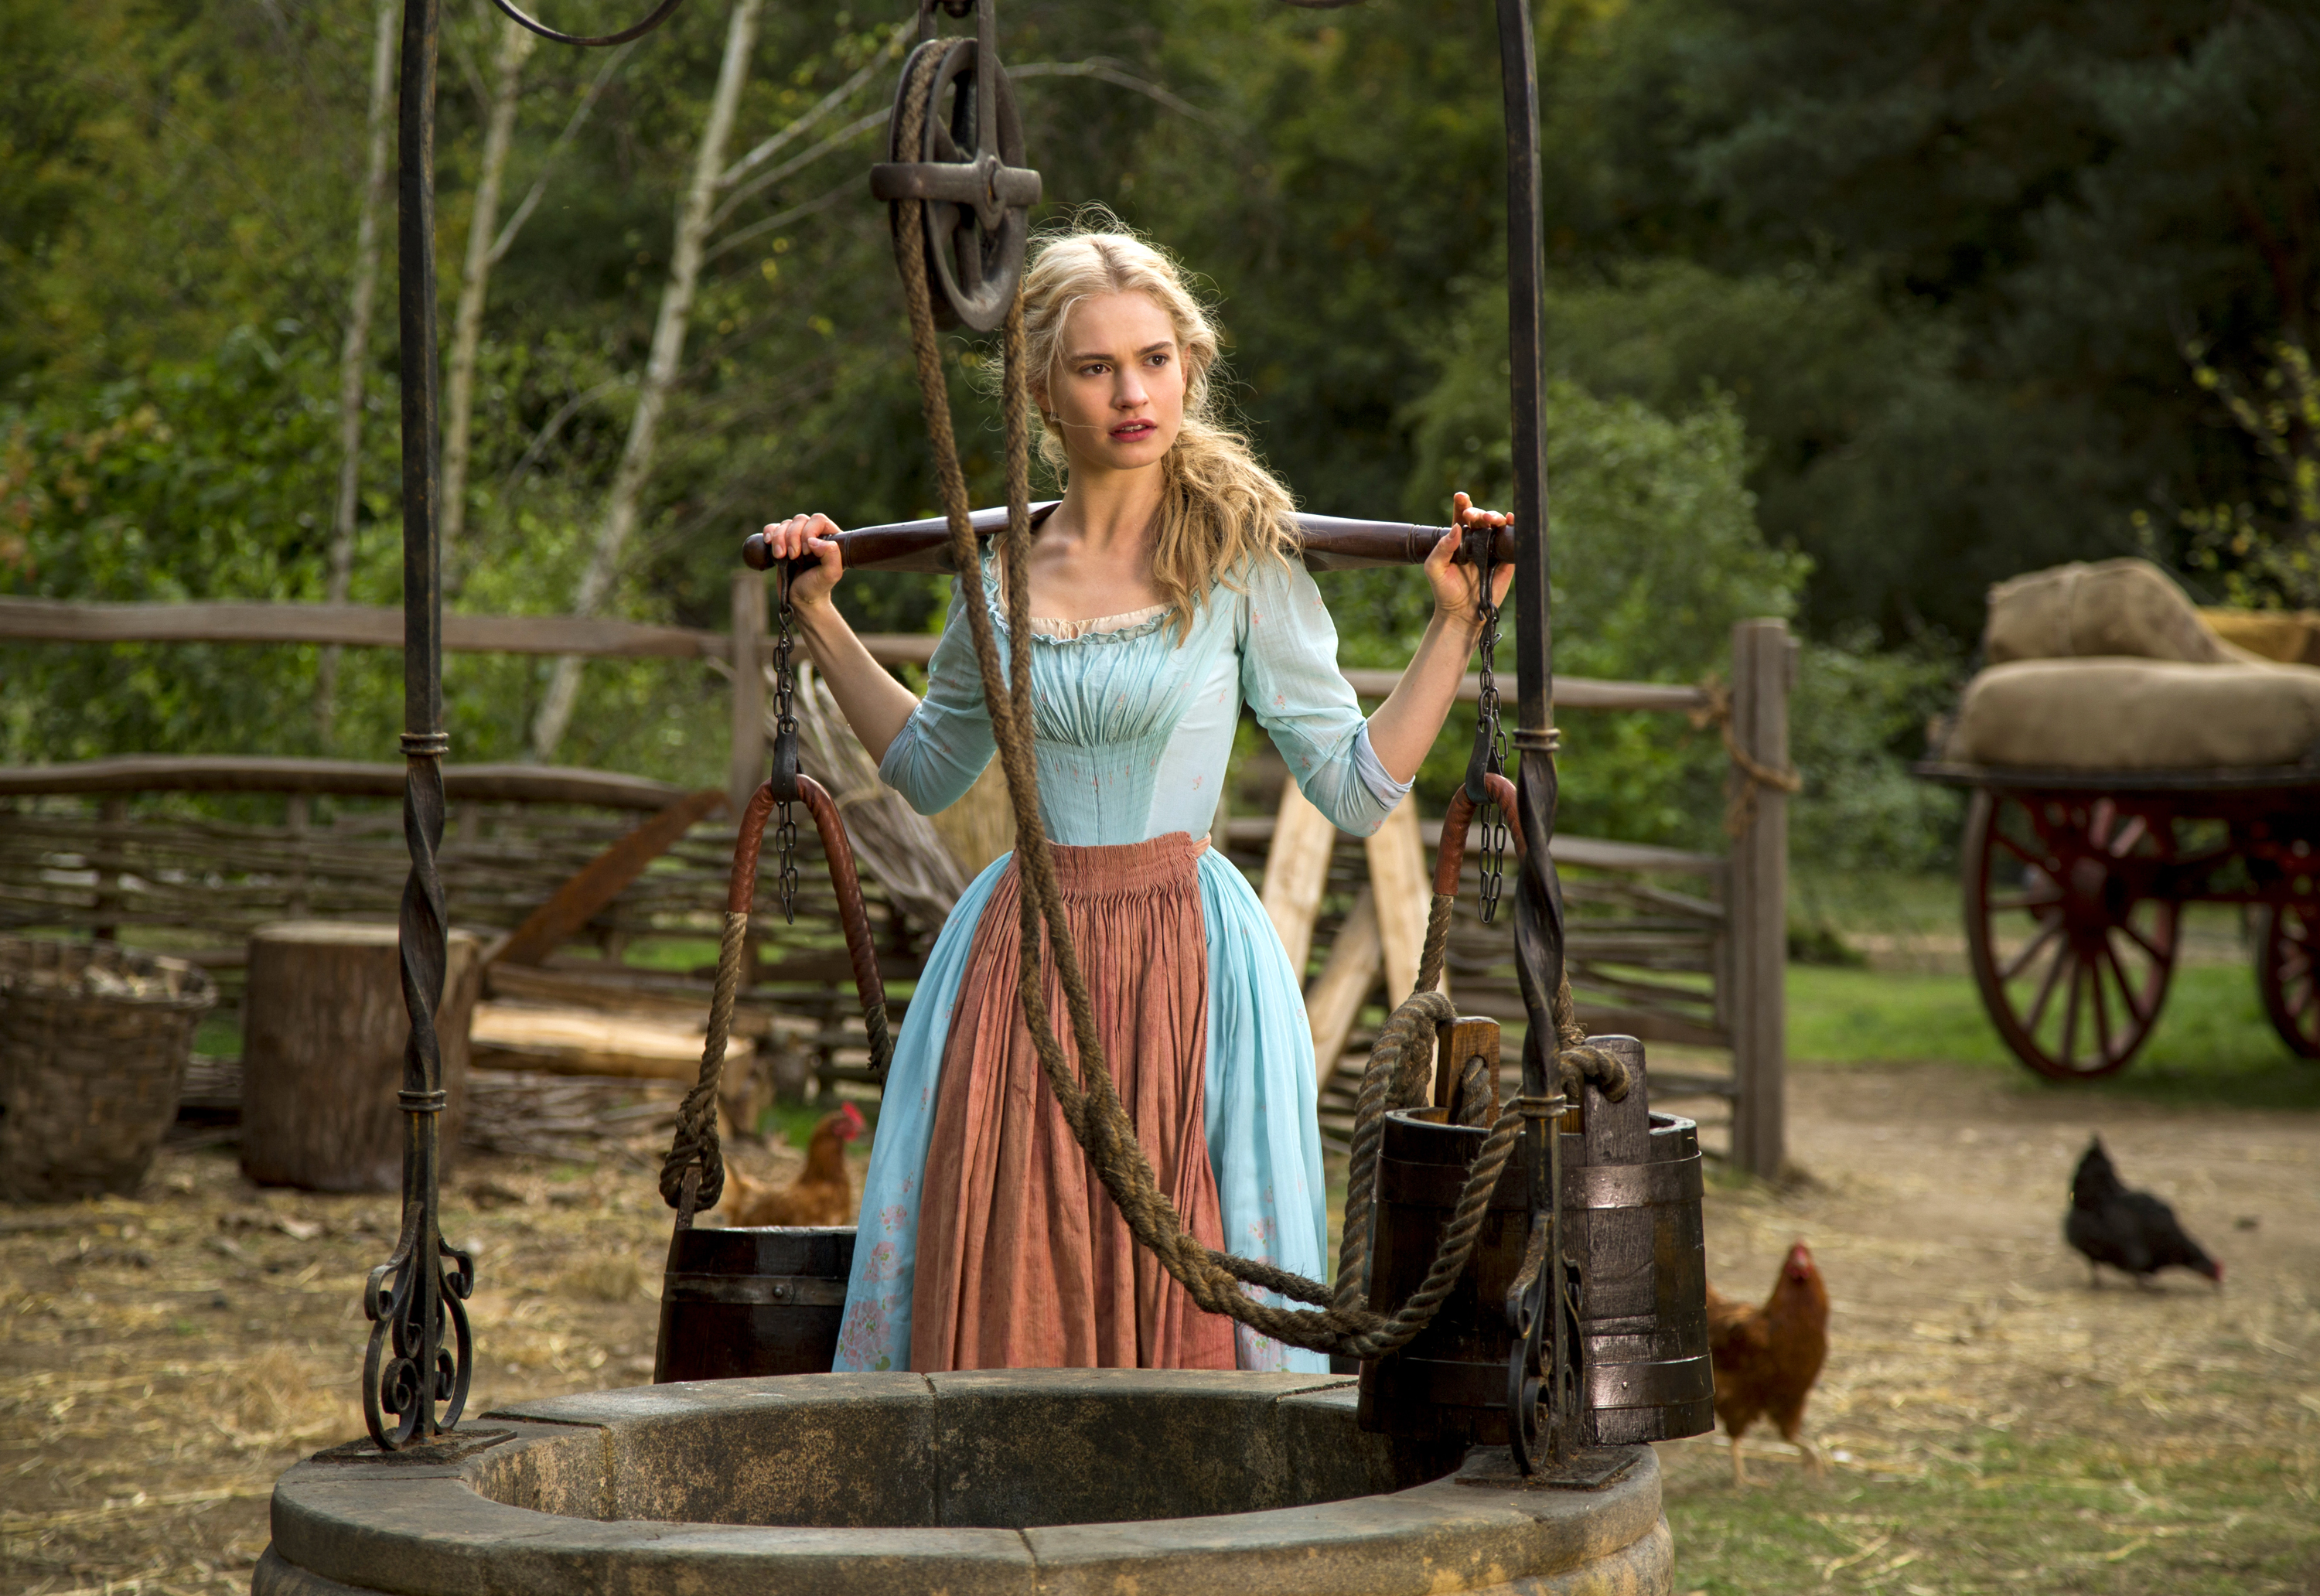 Glass slipper fits for live-action ‘Cinderella’